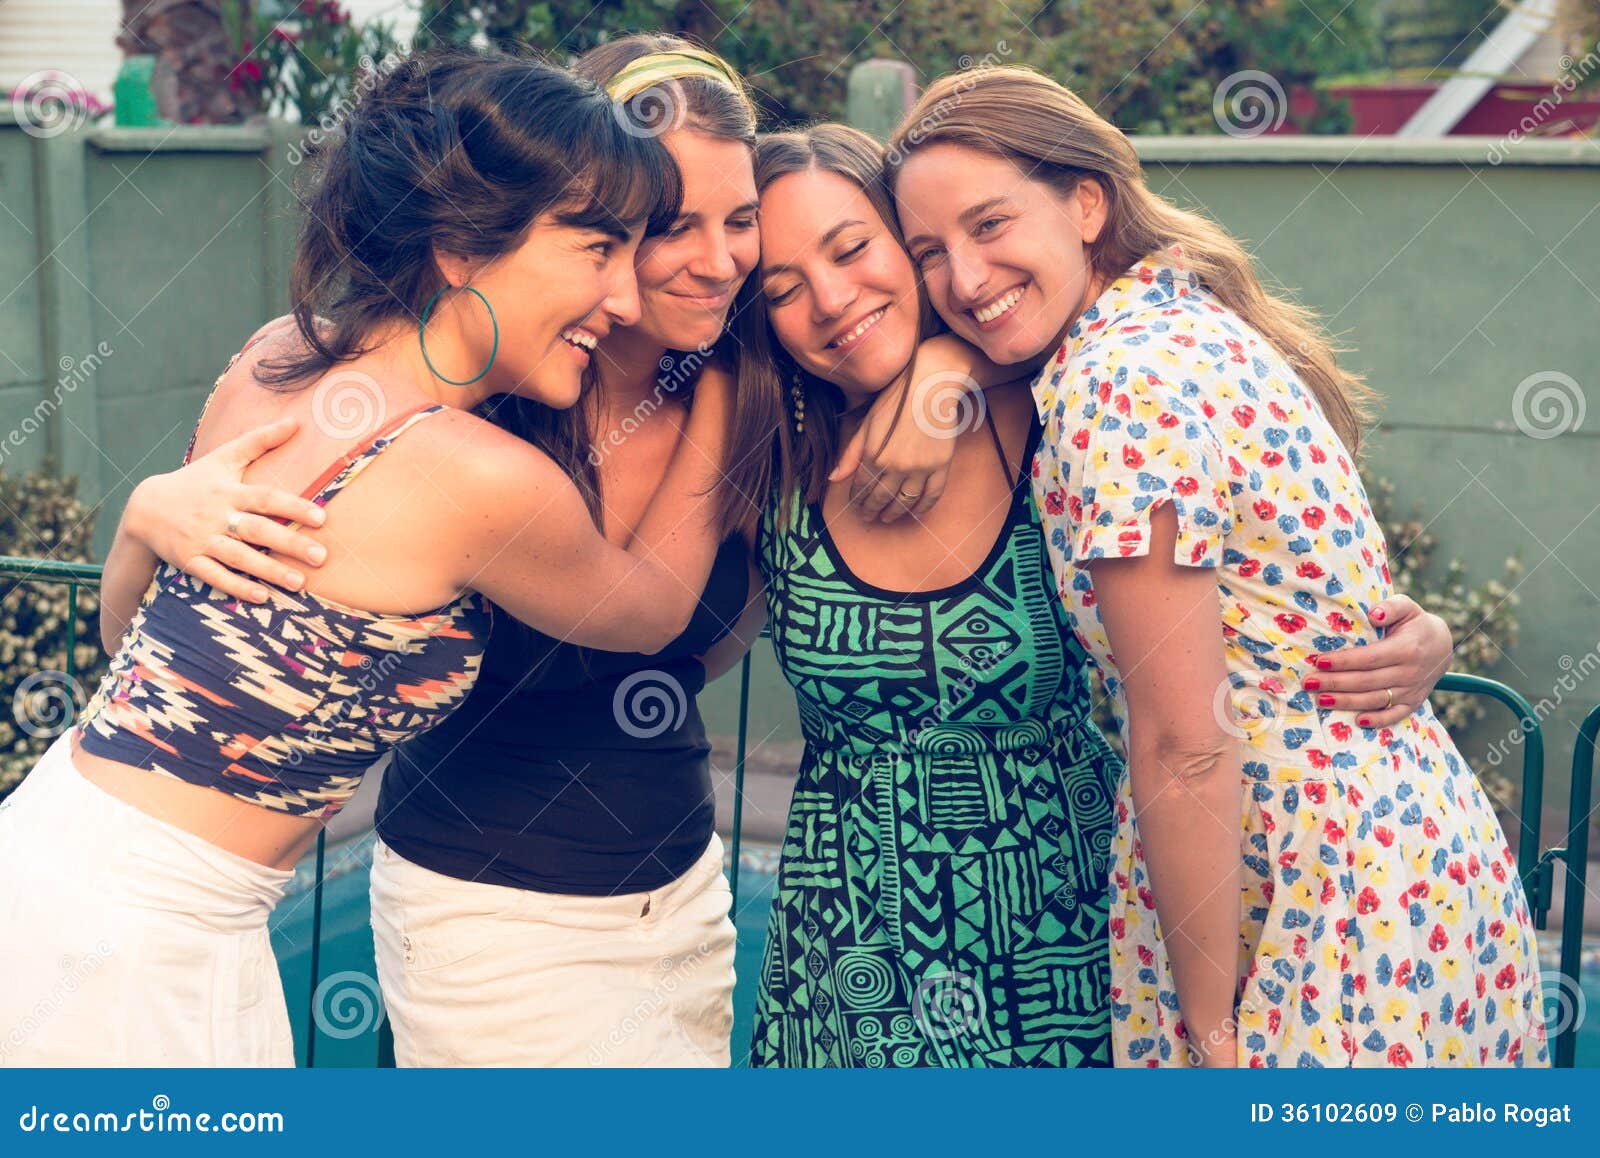 Four Best Friends Hugging Each Other Stock Image - Image of ...